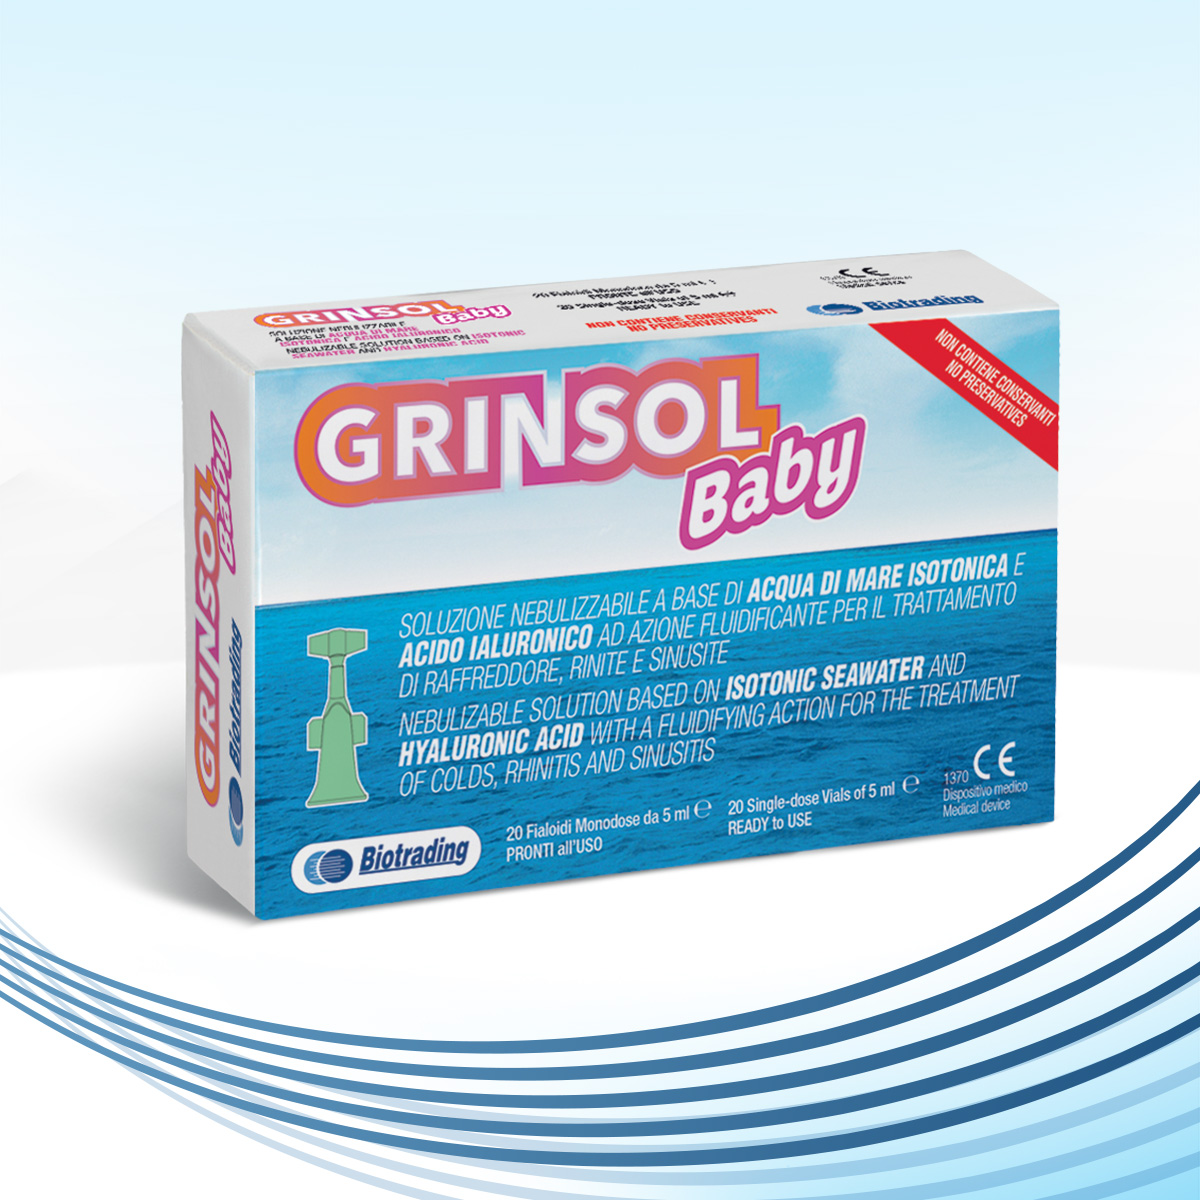 Grinsol Baby